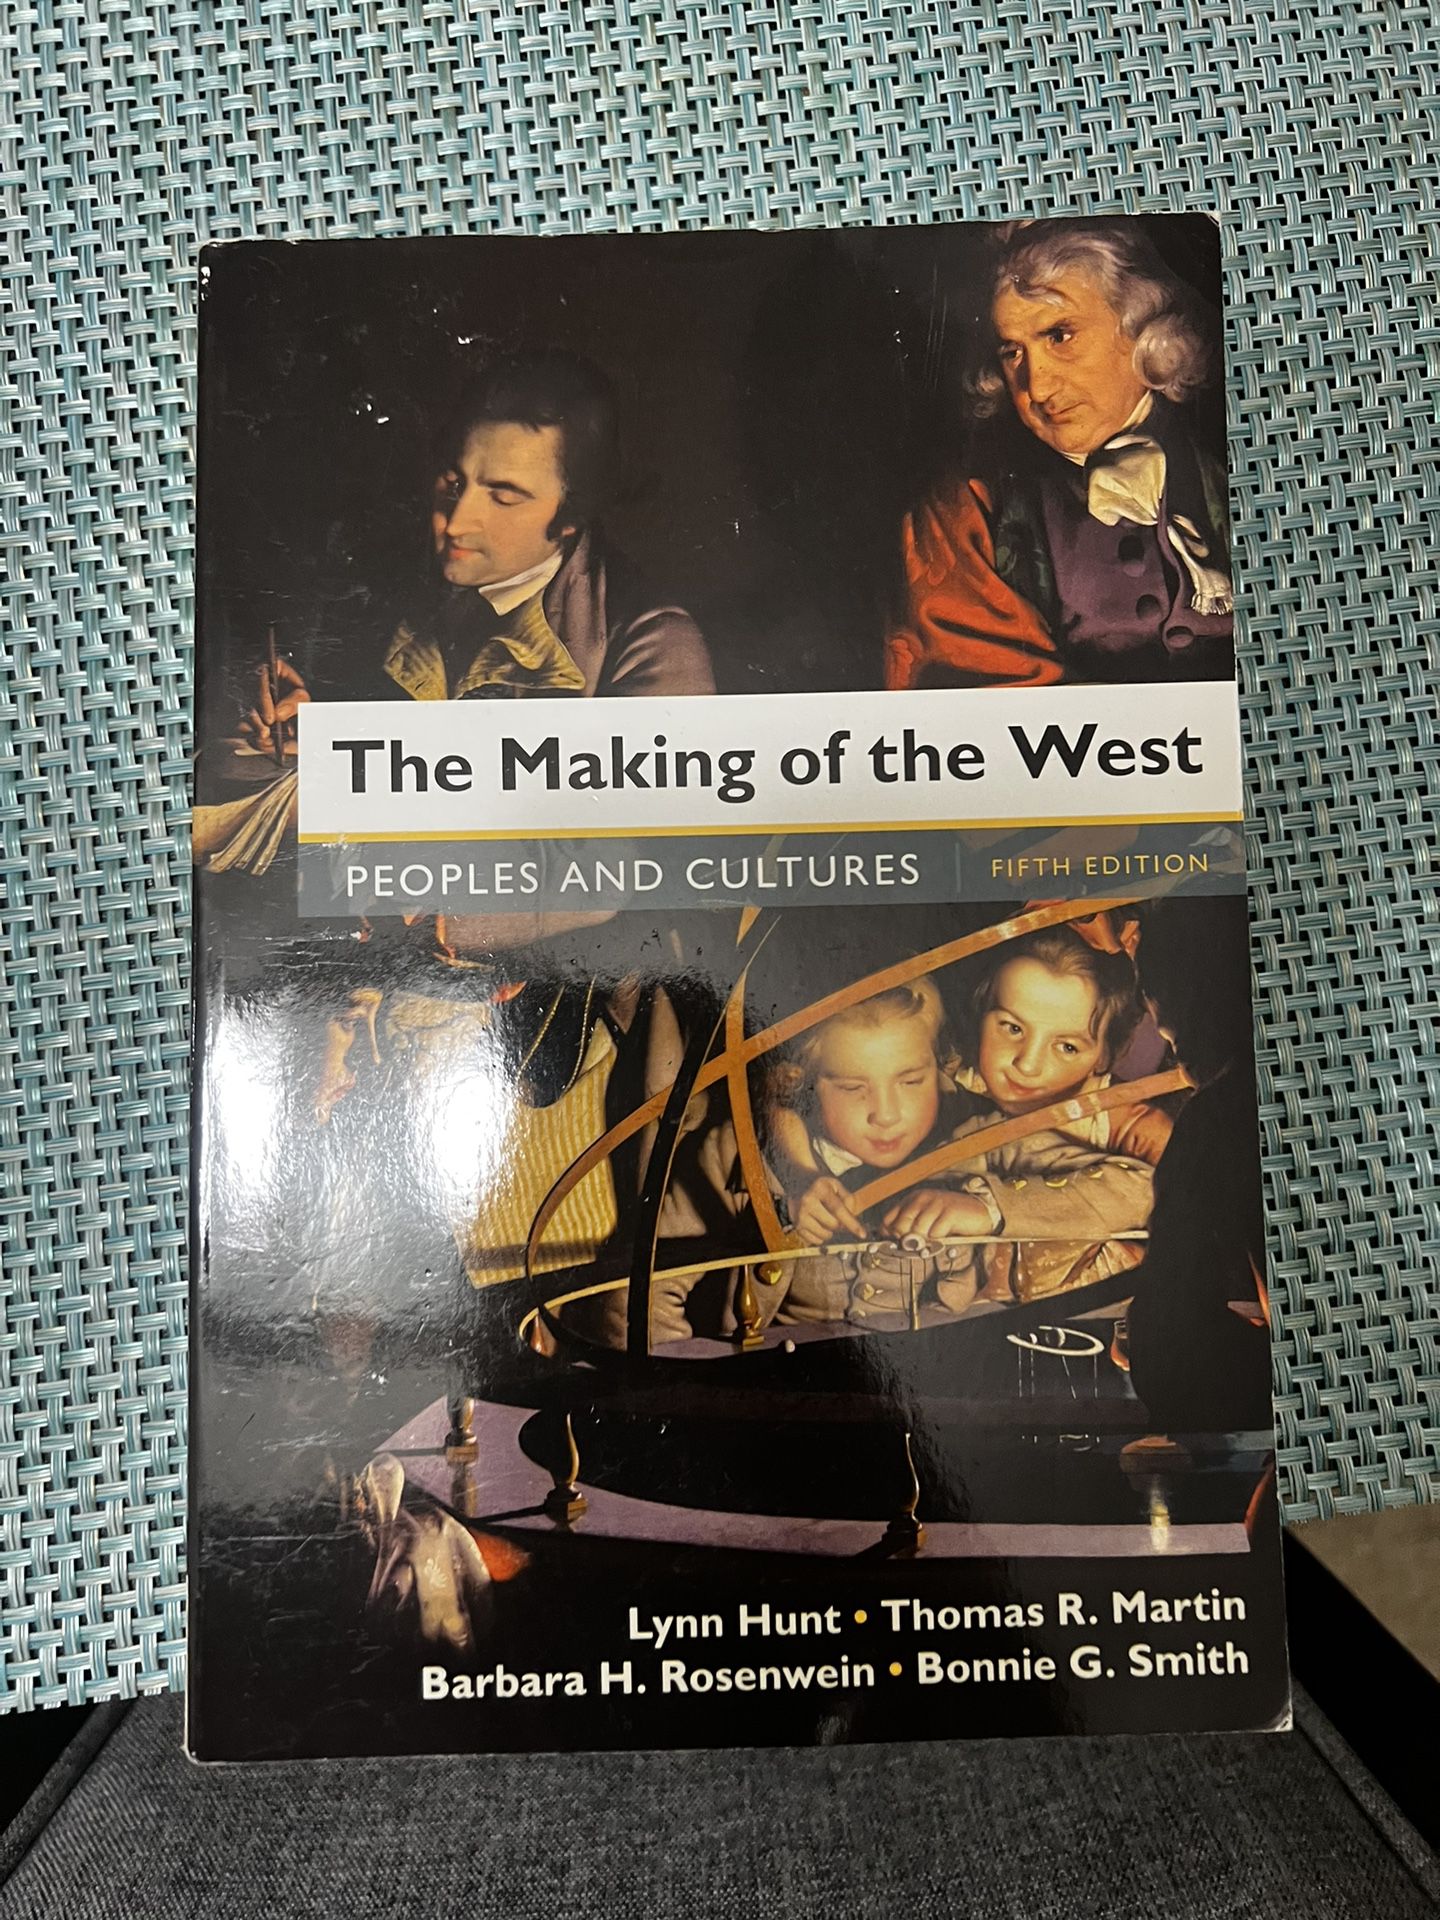 The Making of the West PEOPLES AND CULTURES FIFTH EDITION